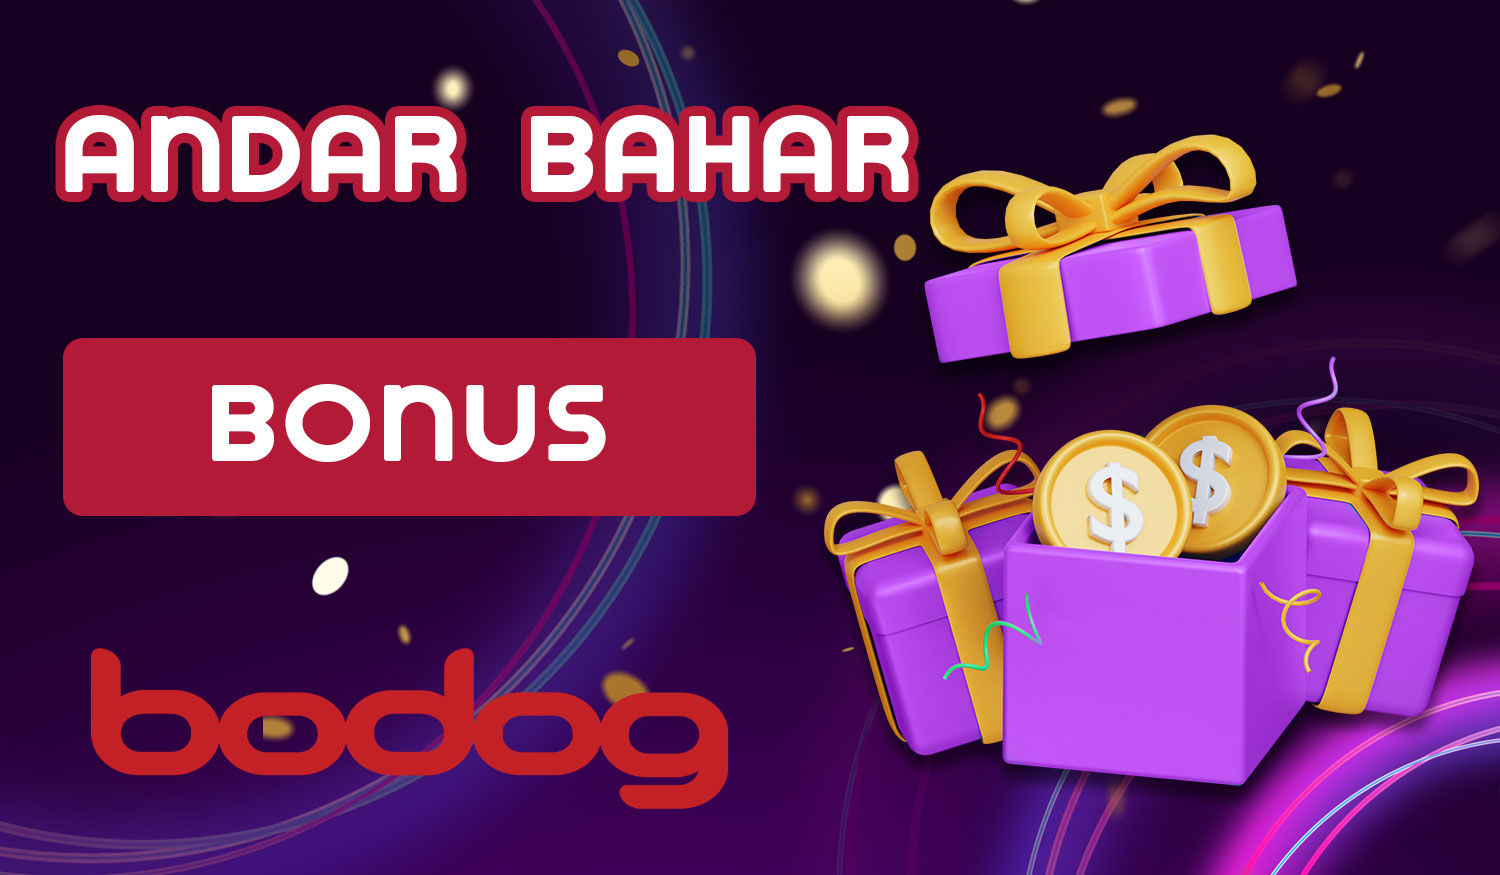 Bodog India offers a wide range of bonuses for Andar Bahar players